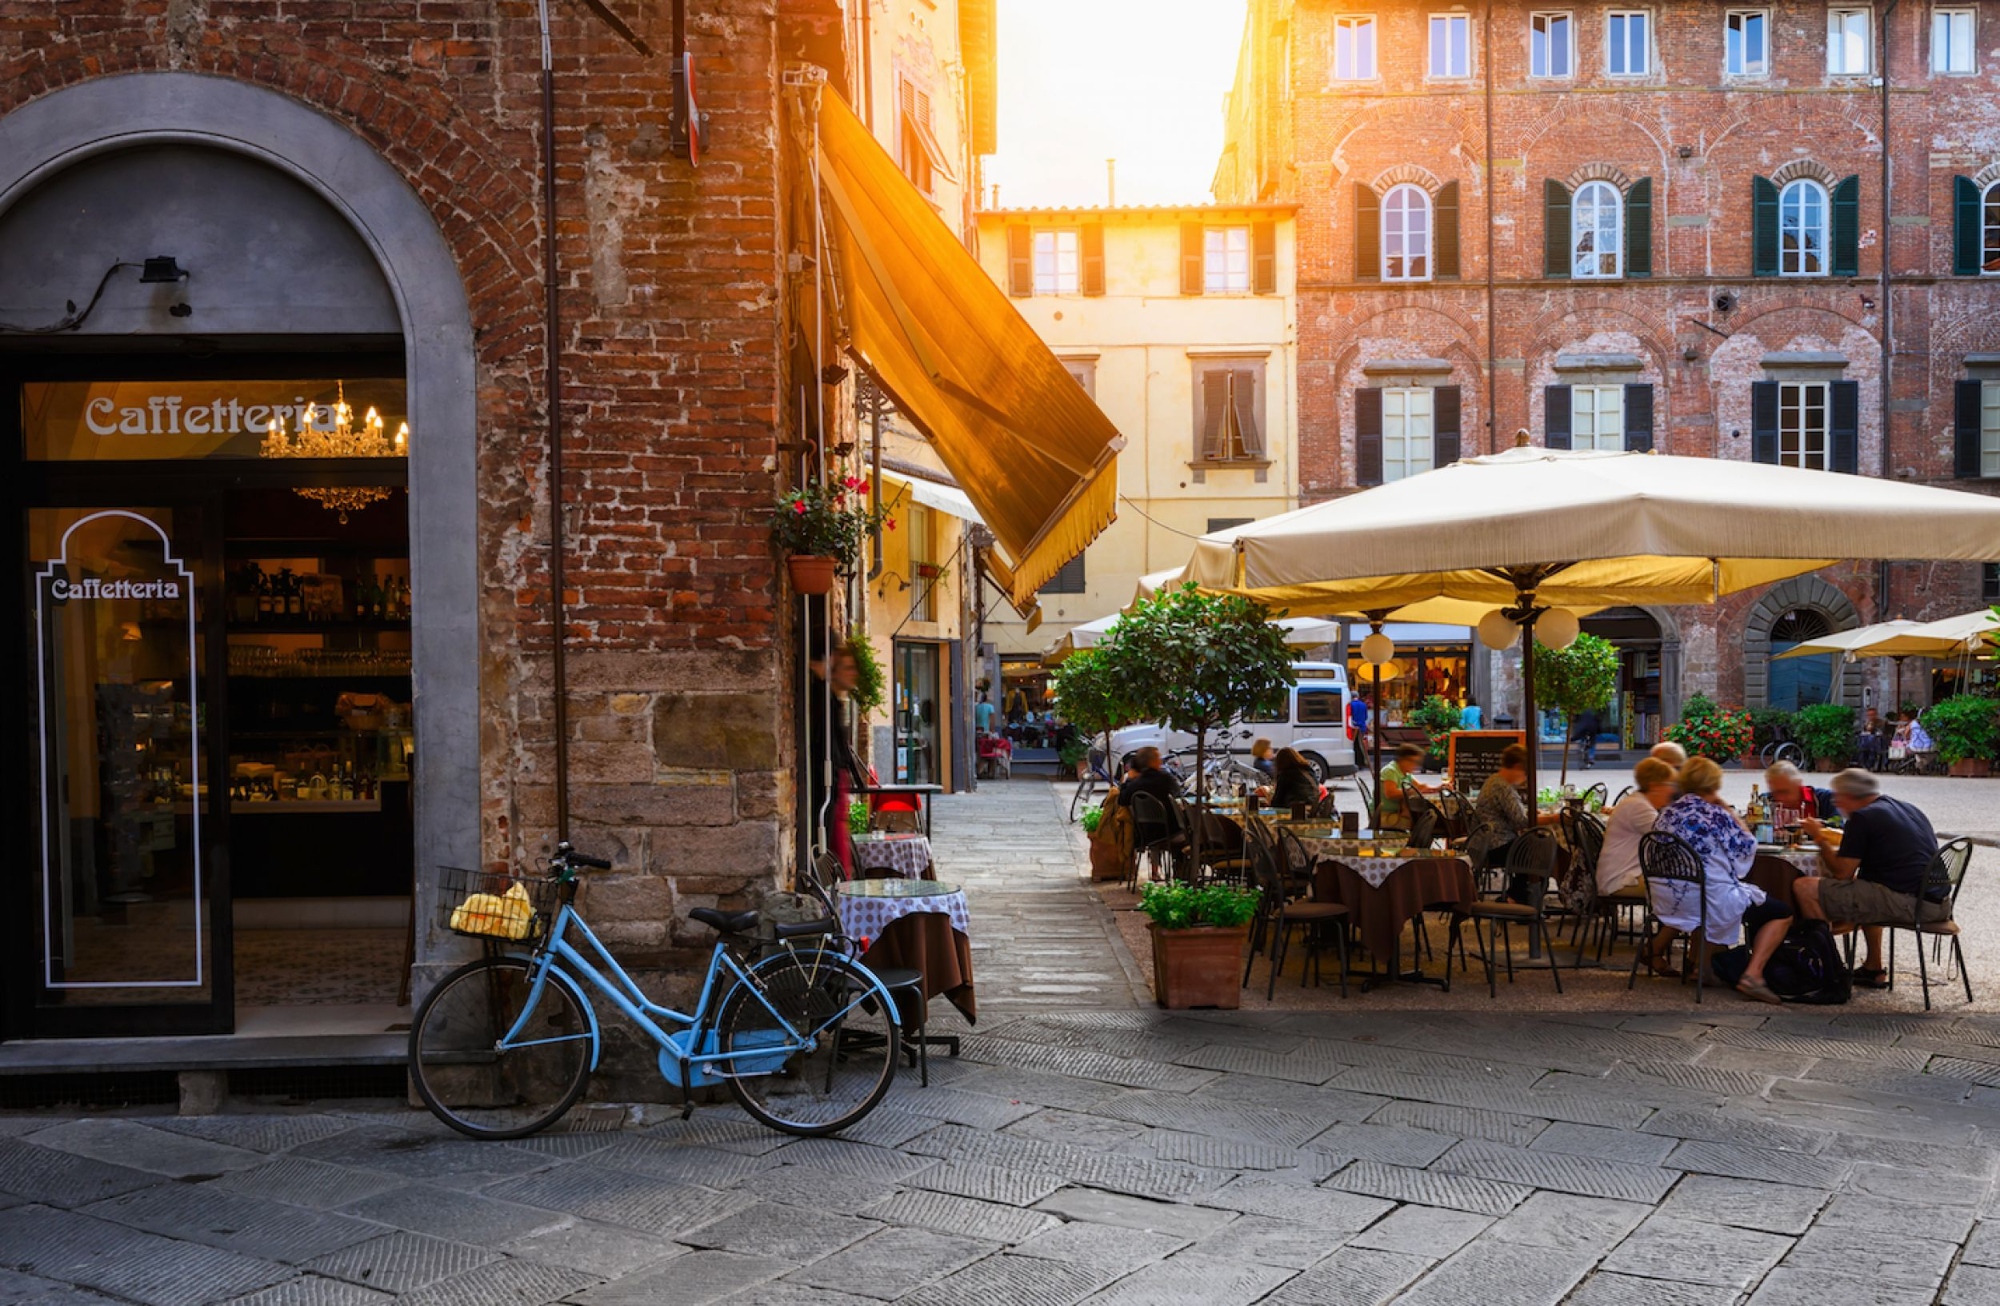 A week of cuisine, culture and history in Tuscany